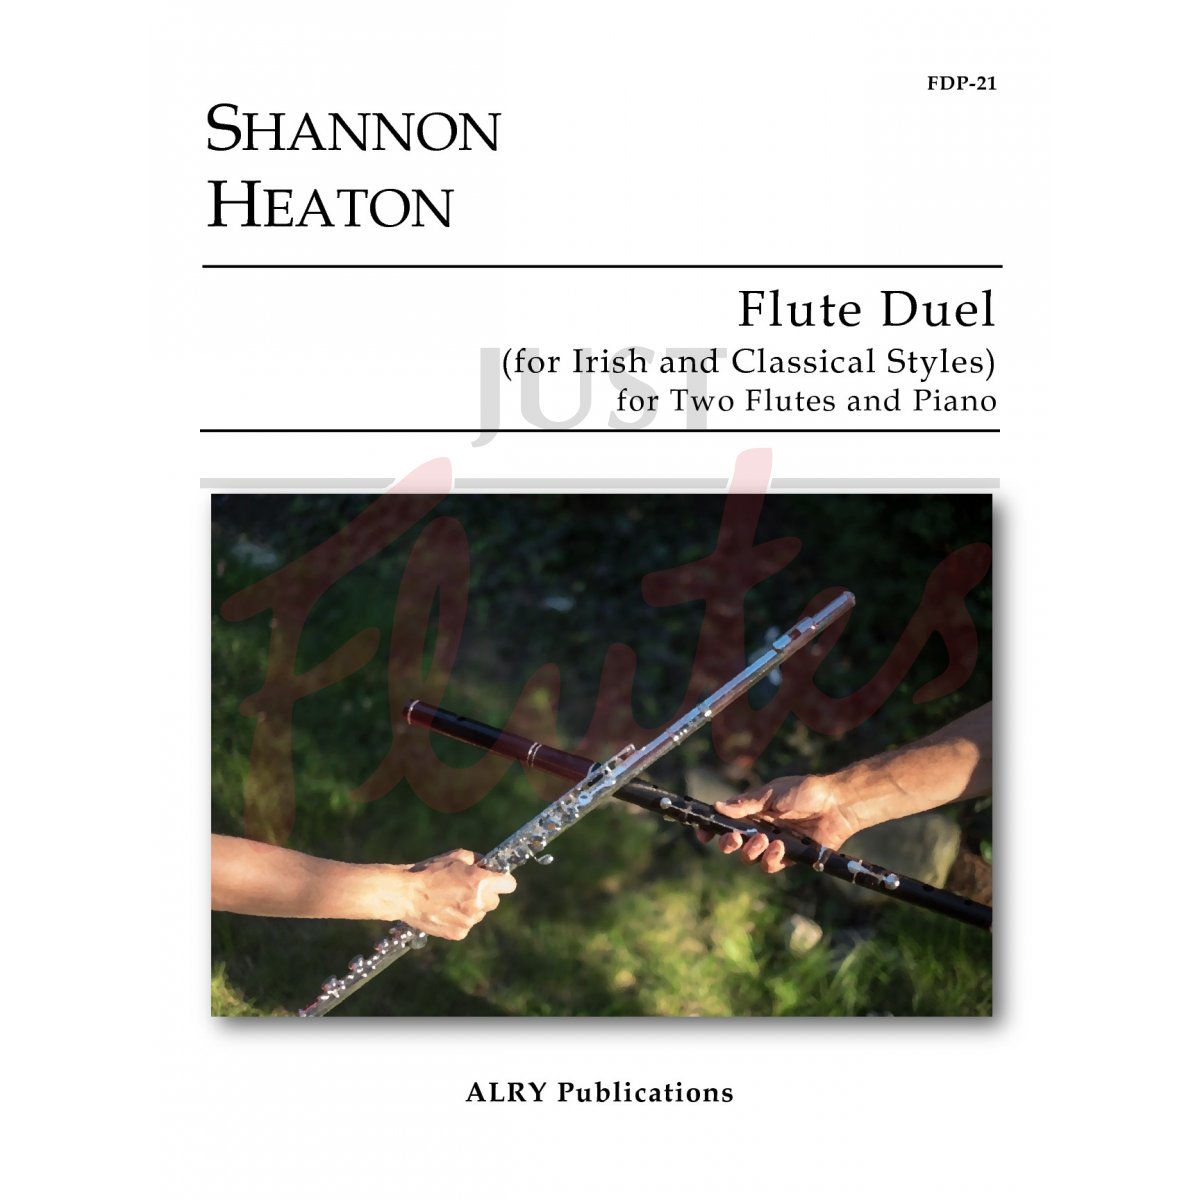 Flute Duel (for Irish and Classical Styles) for Two Flutes and Piano